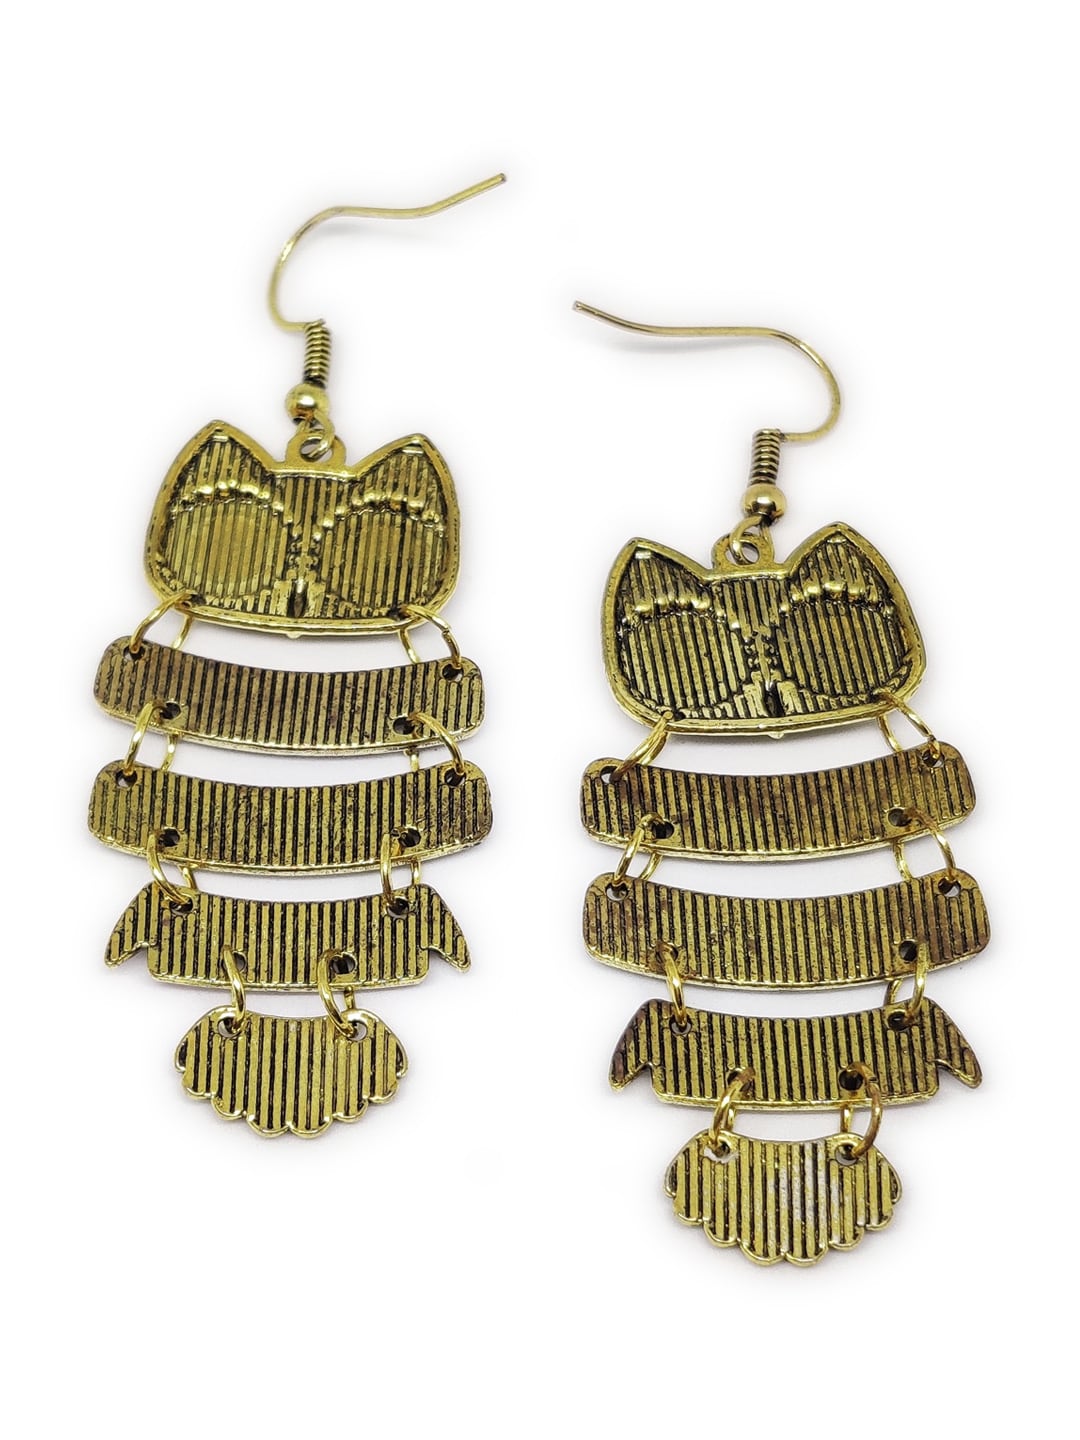 EL REGALO Gold-Toned & Black Quirky Drop Earrings - for Women and Girls
Style ID: 16770282